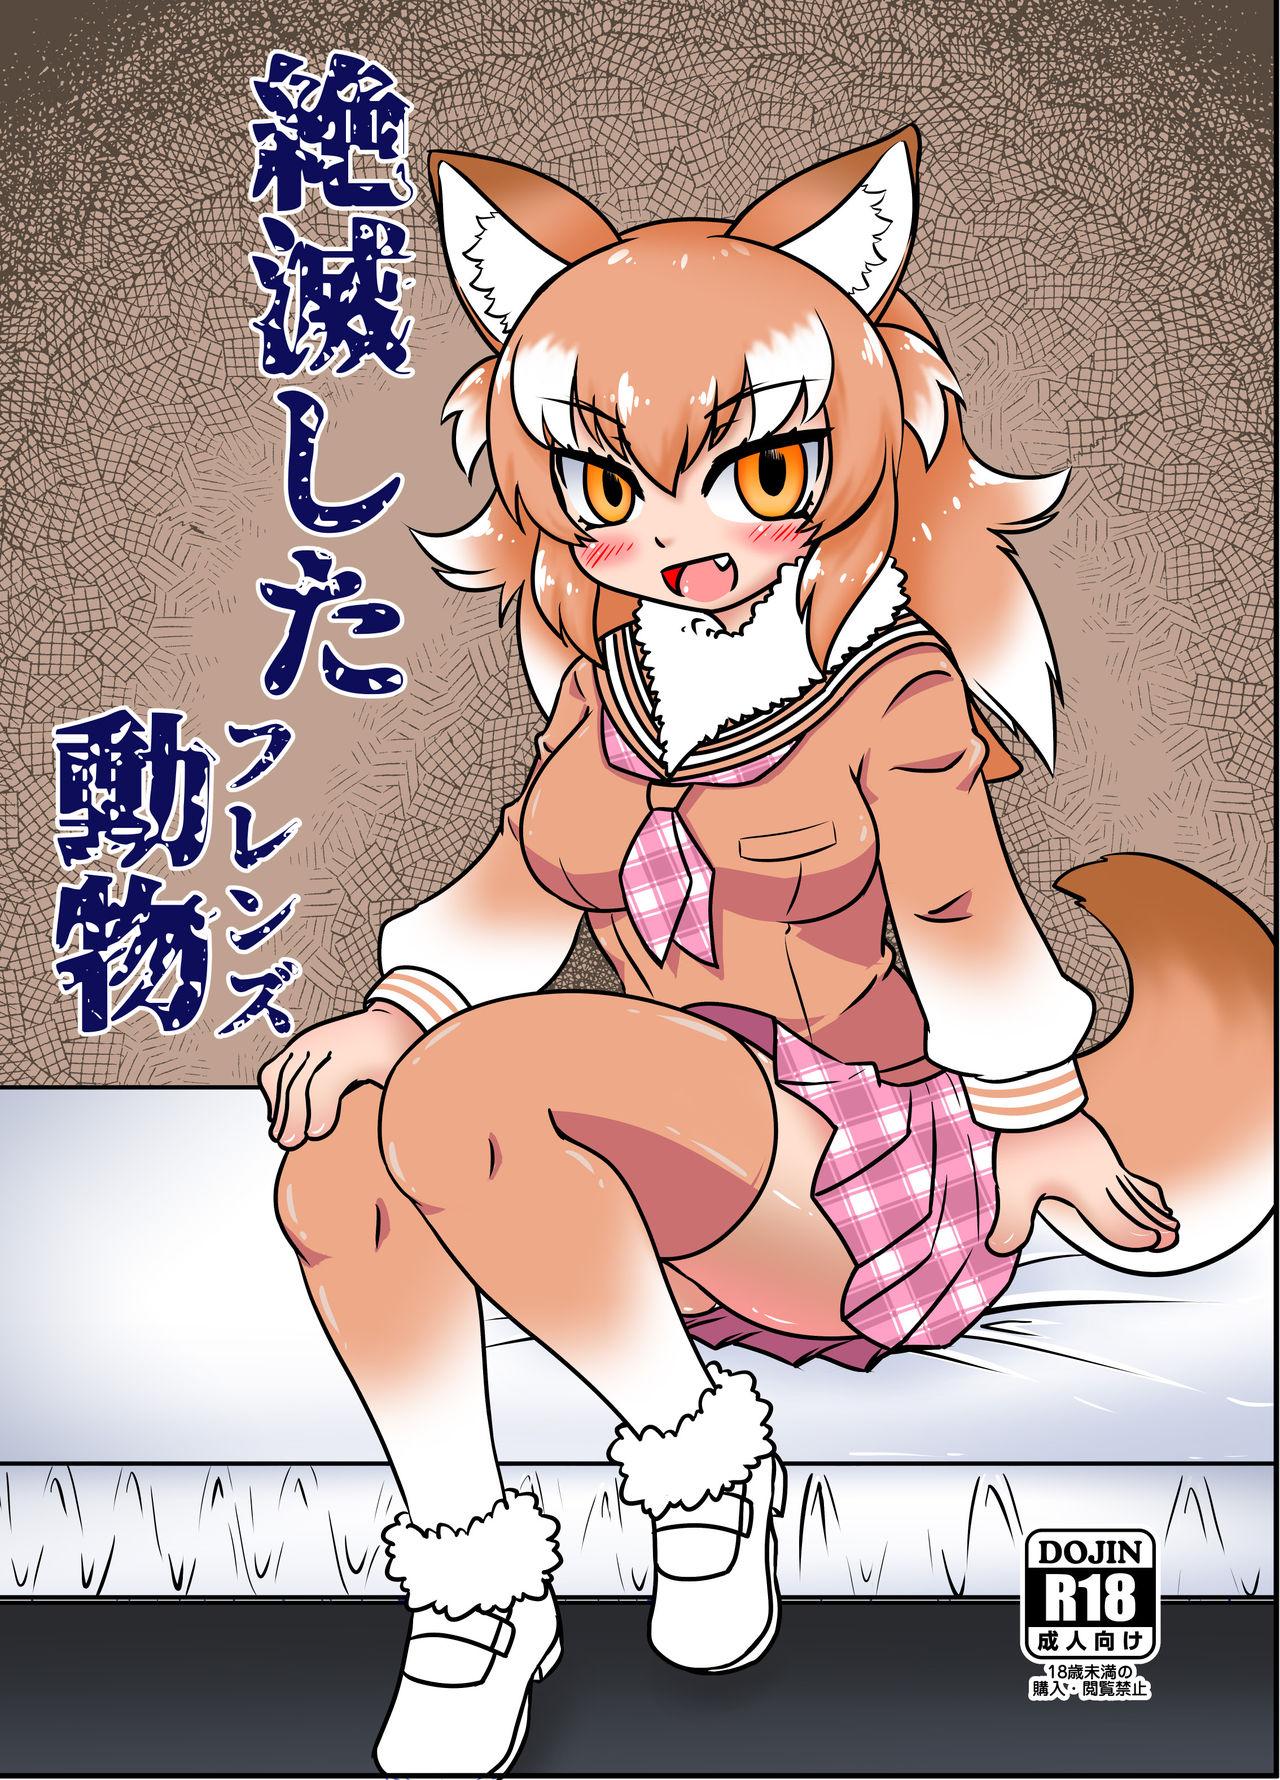 Young Old 絶滅したフレンズ ～ニホンオオカミ編～ - Kemono friends Anal Licking - Page 2